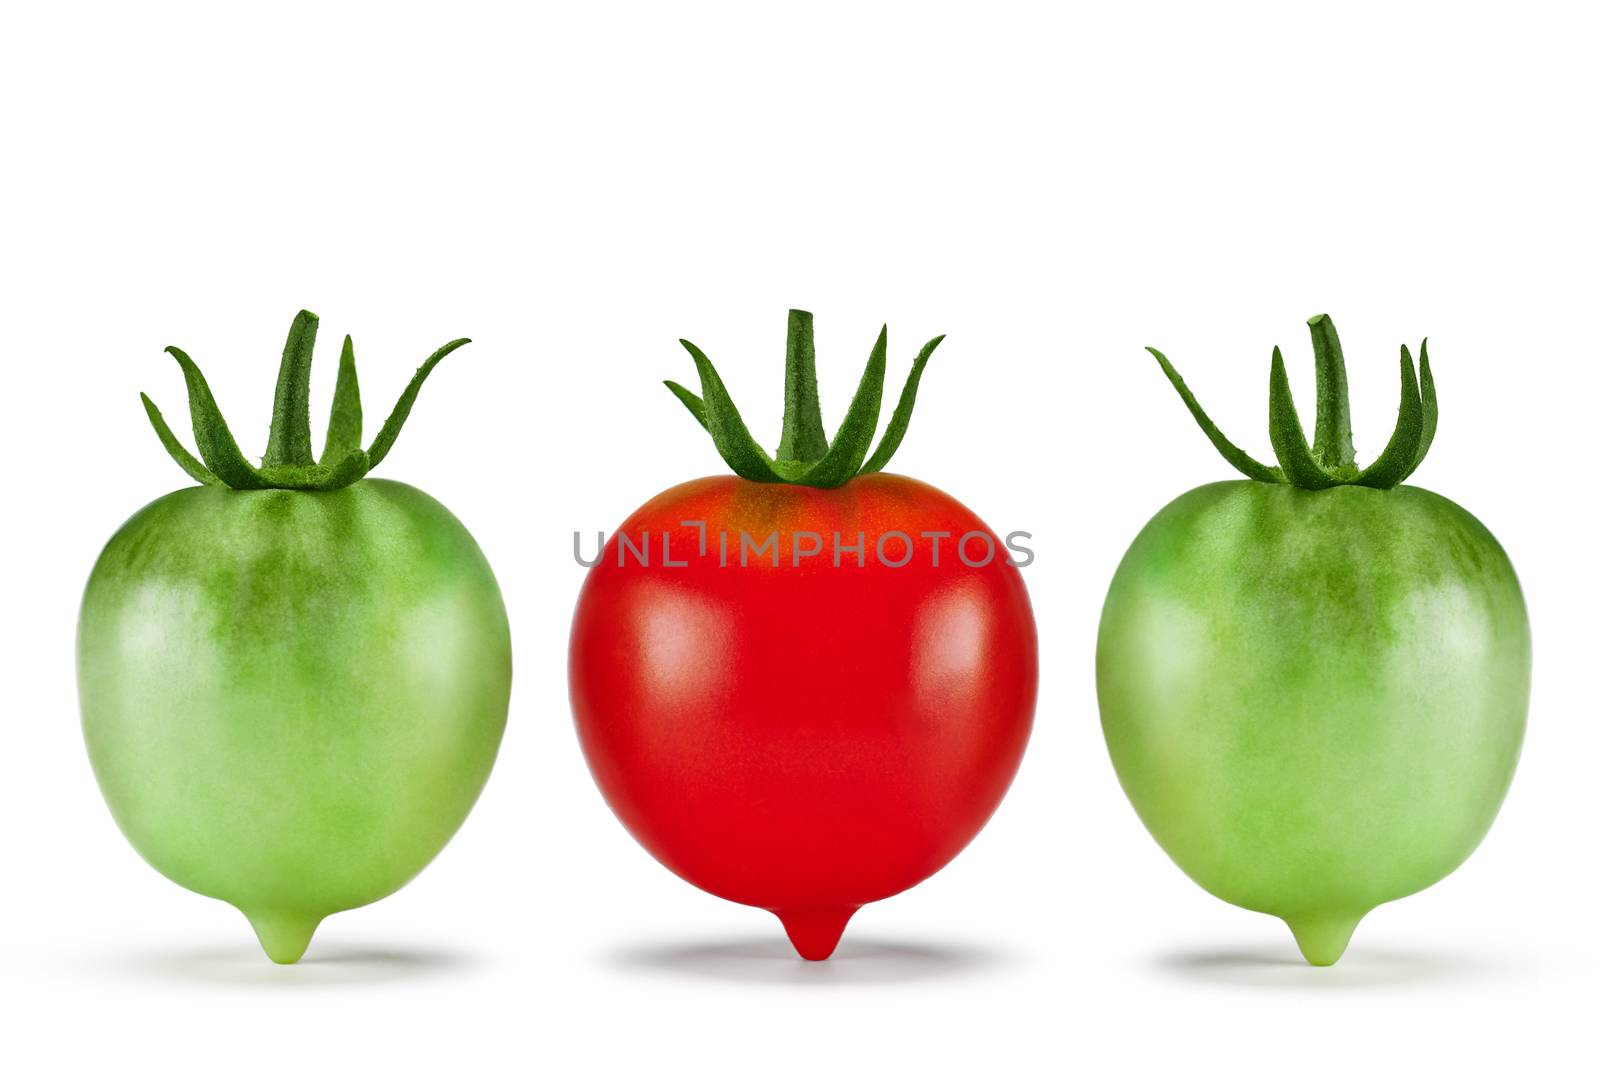 Tomatoes, red, green fresh, organic. Isolated on white background. Business concept - how to stand out - marketing and advertising, food closeup